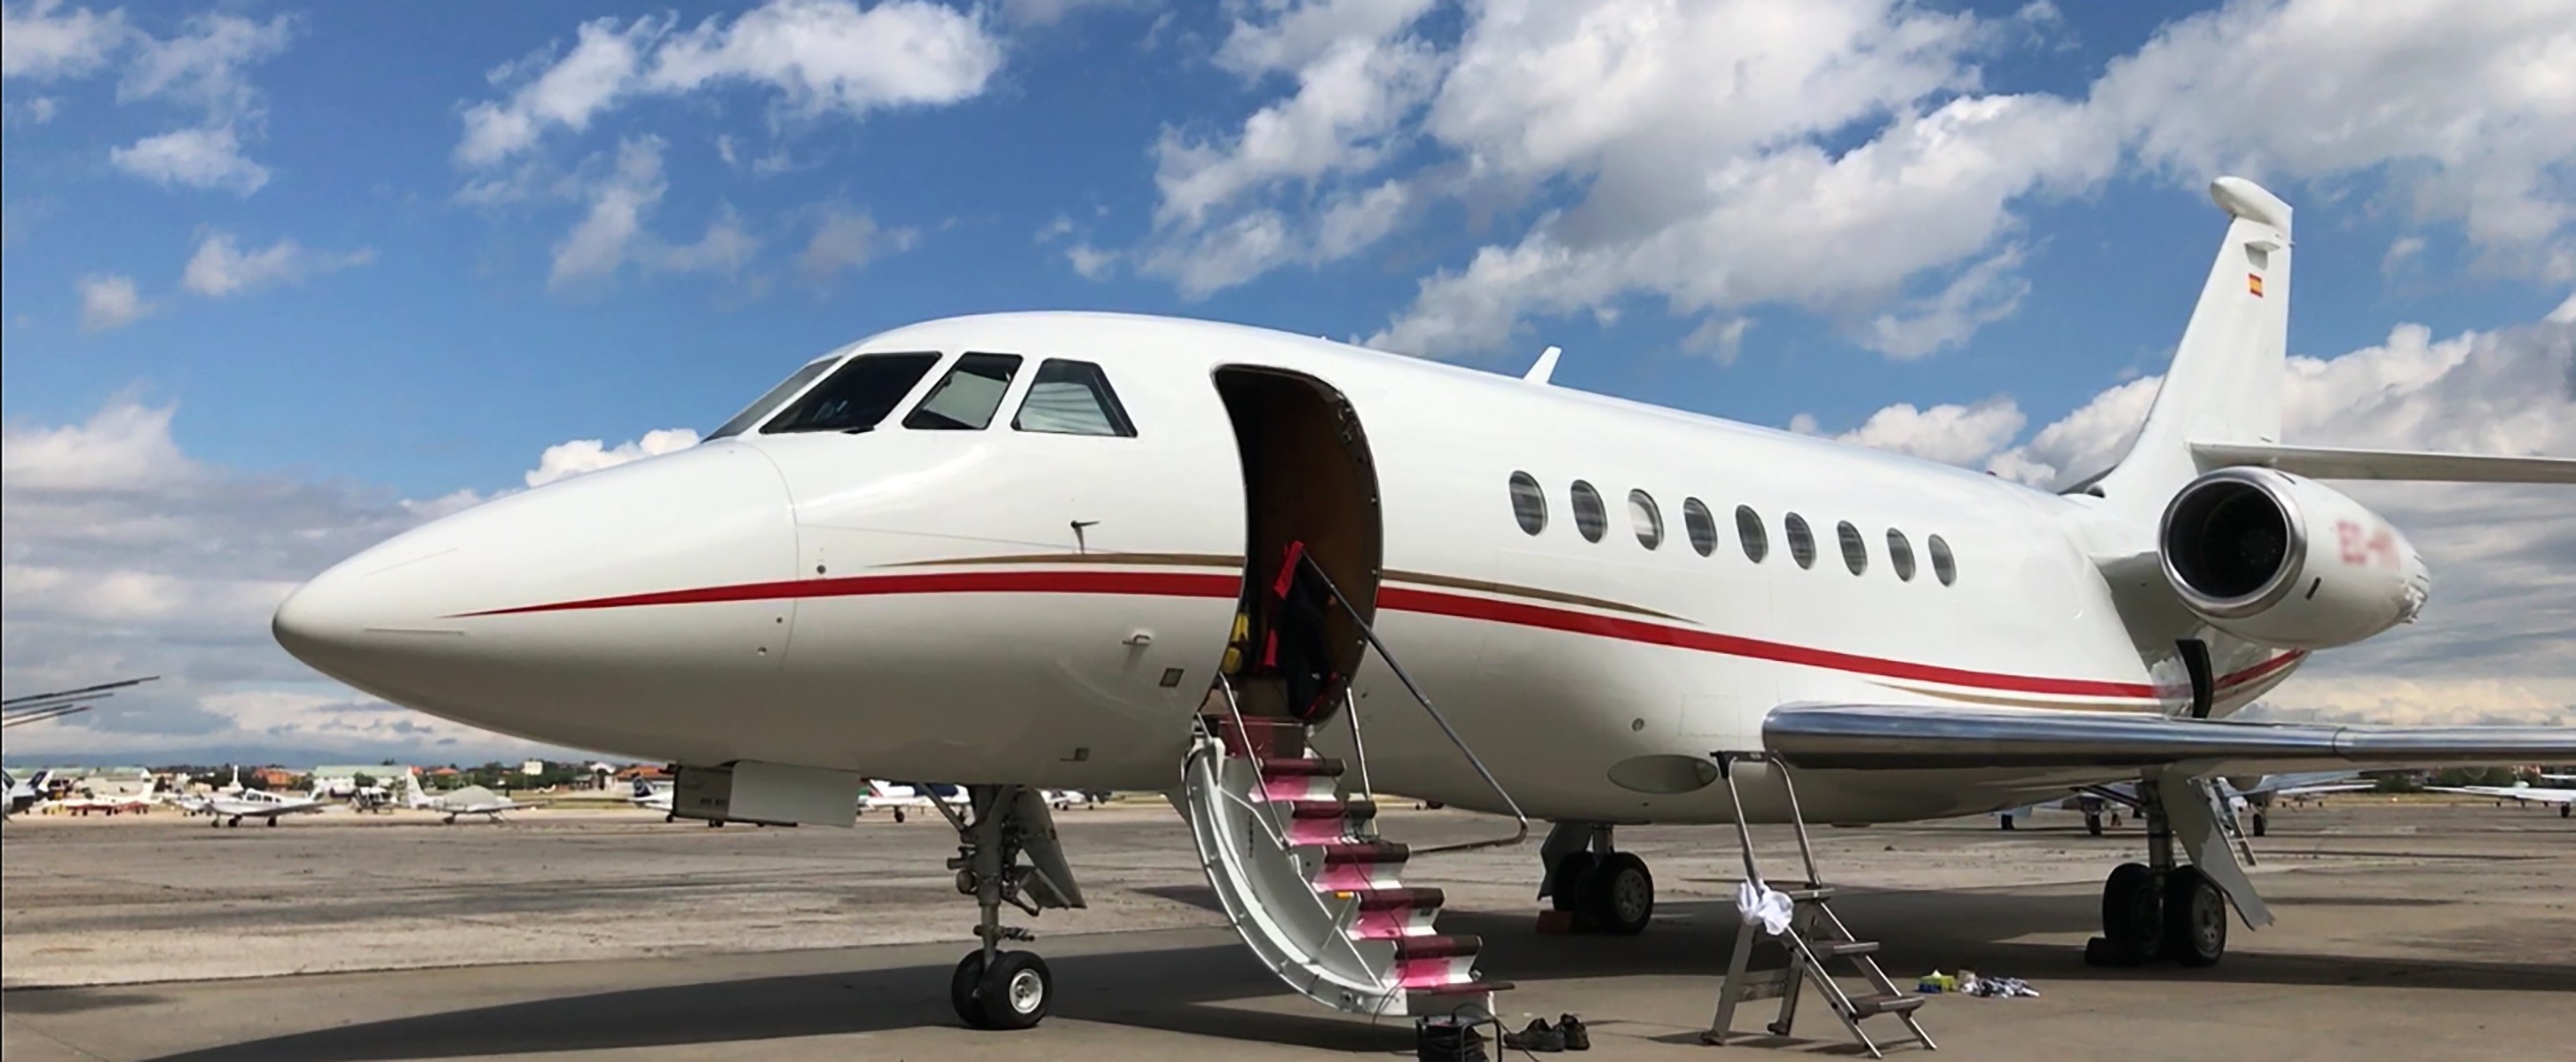 A private plane on the tarmac with the steps lowered